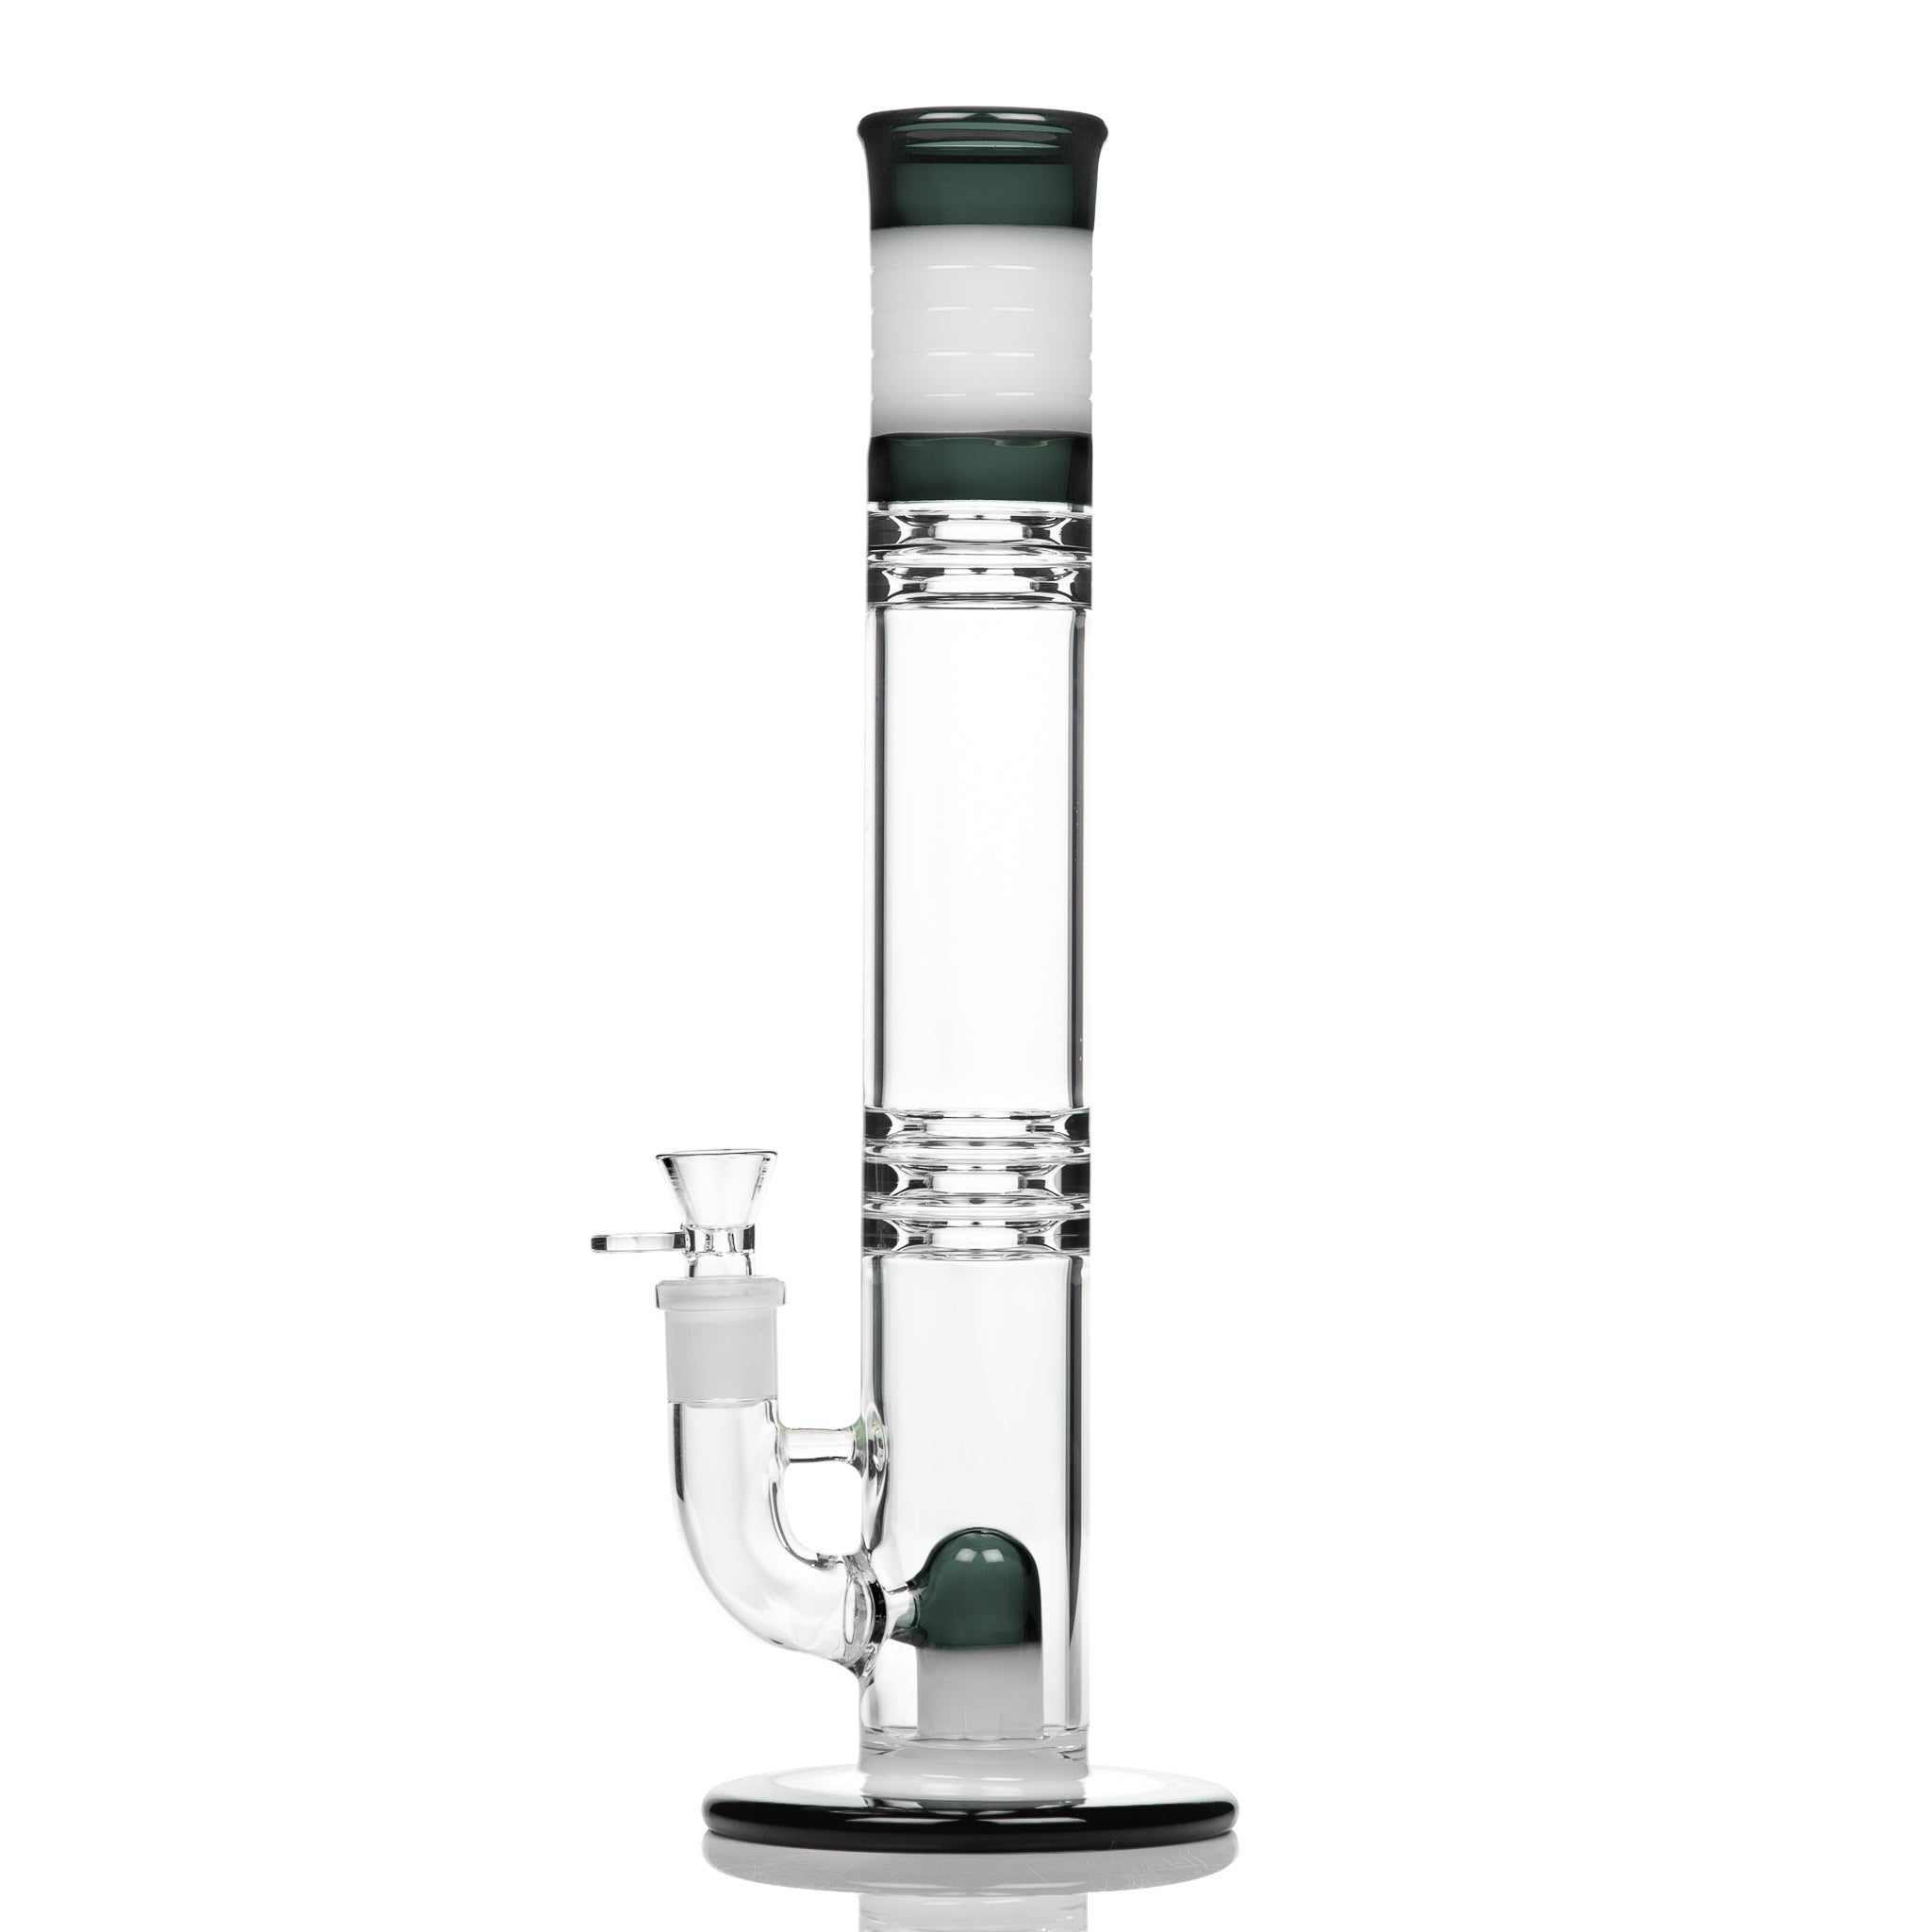 Straight glass bong with cap style perc and stemless 18mm joint.